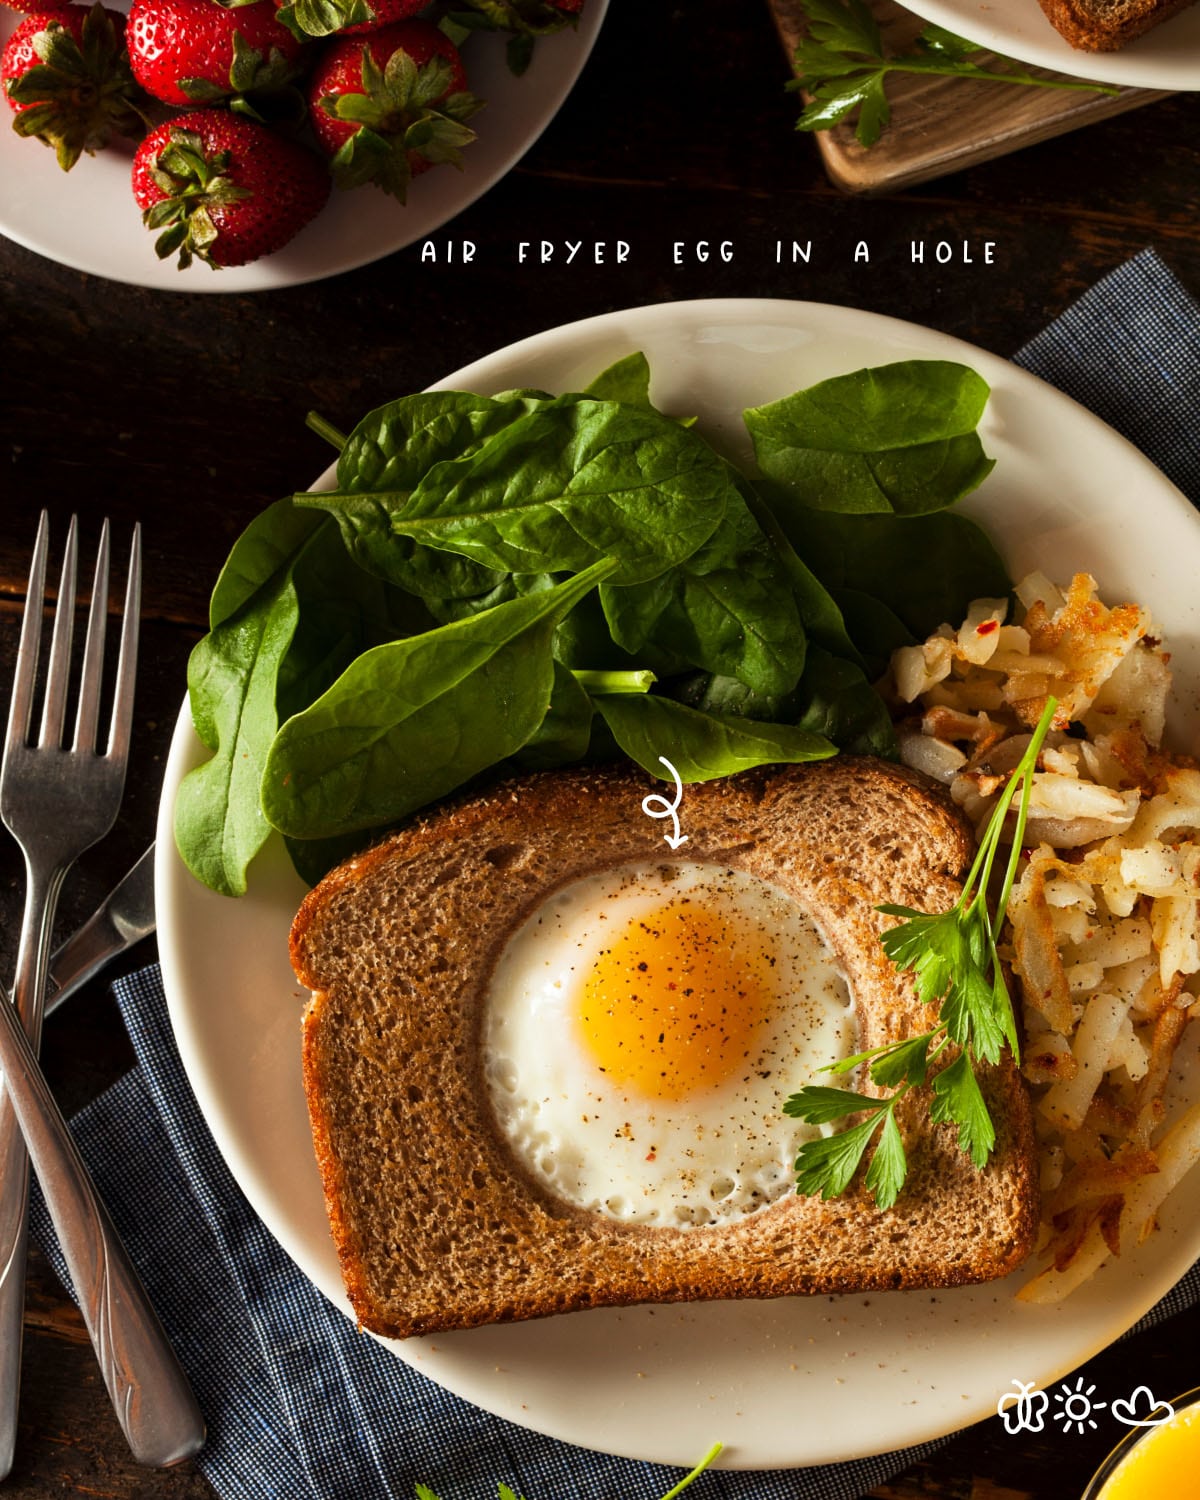 Egg in a hole or egg toast is a quick and easy breakfast made in an air fryer. You can enjoy this healthy, protein-packed breakfast if you're on a budget.